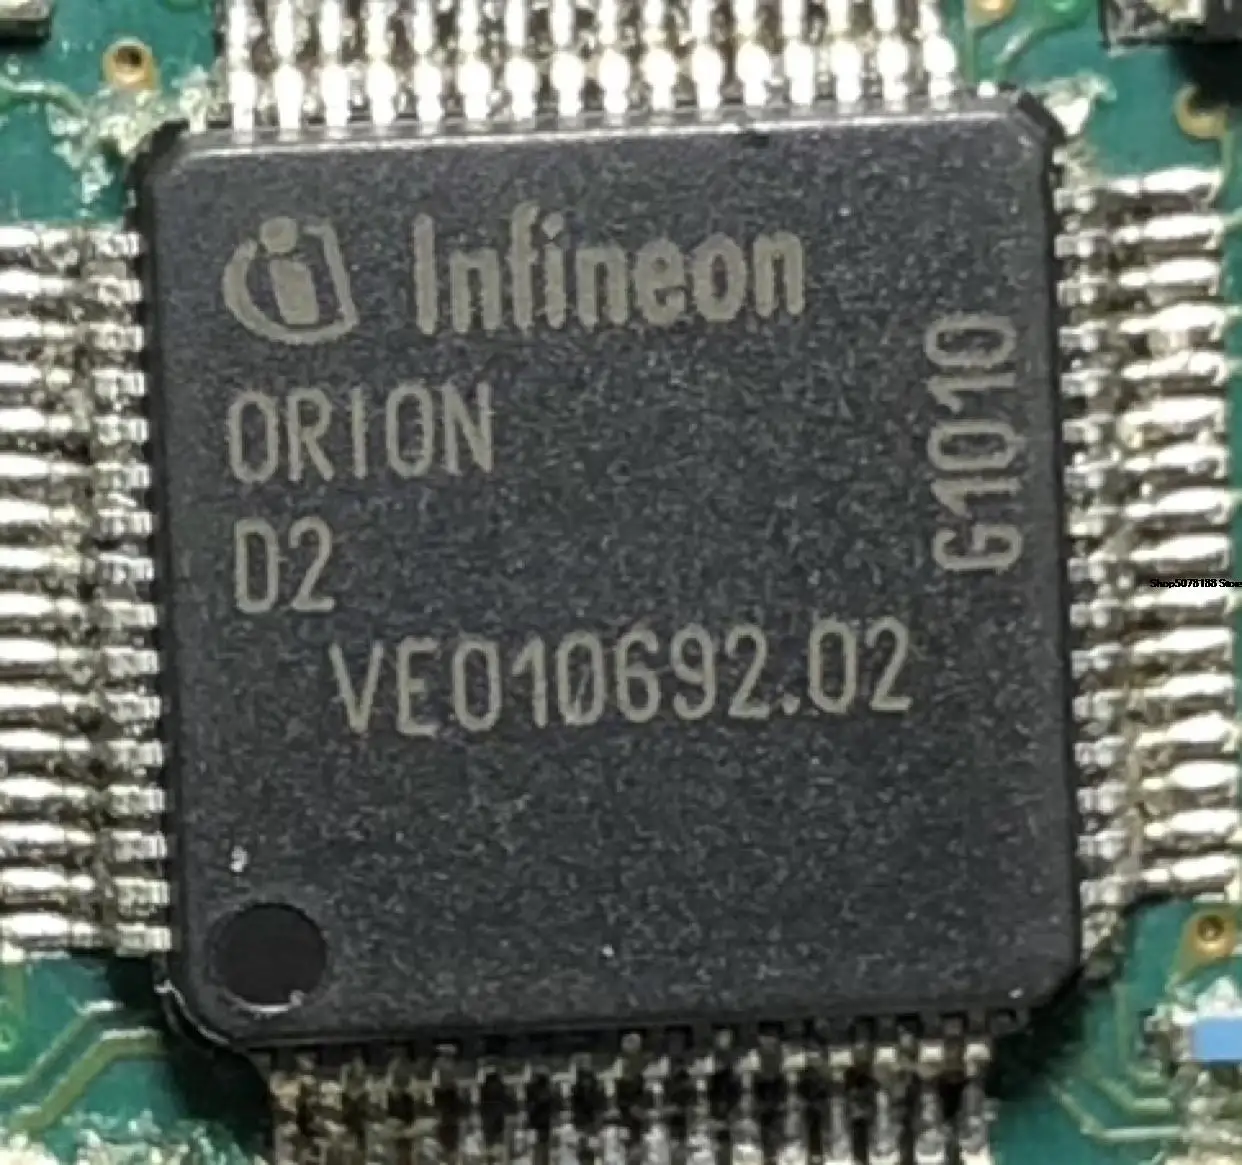 

ORION 0RION D2 ORIOND2 ABSIC Automobile chip electronic component